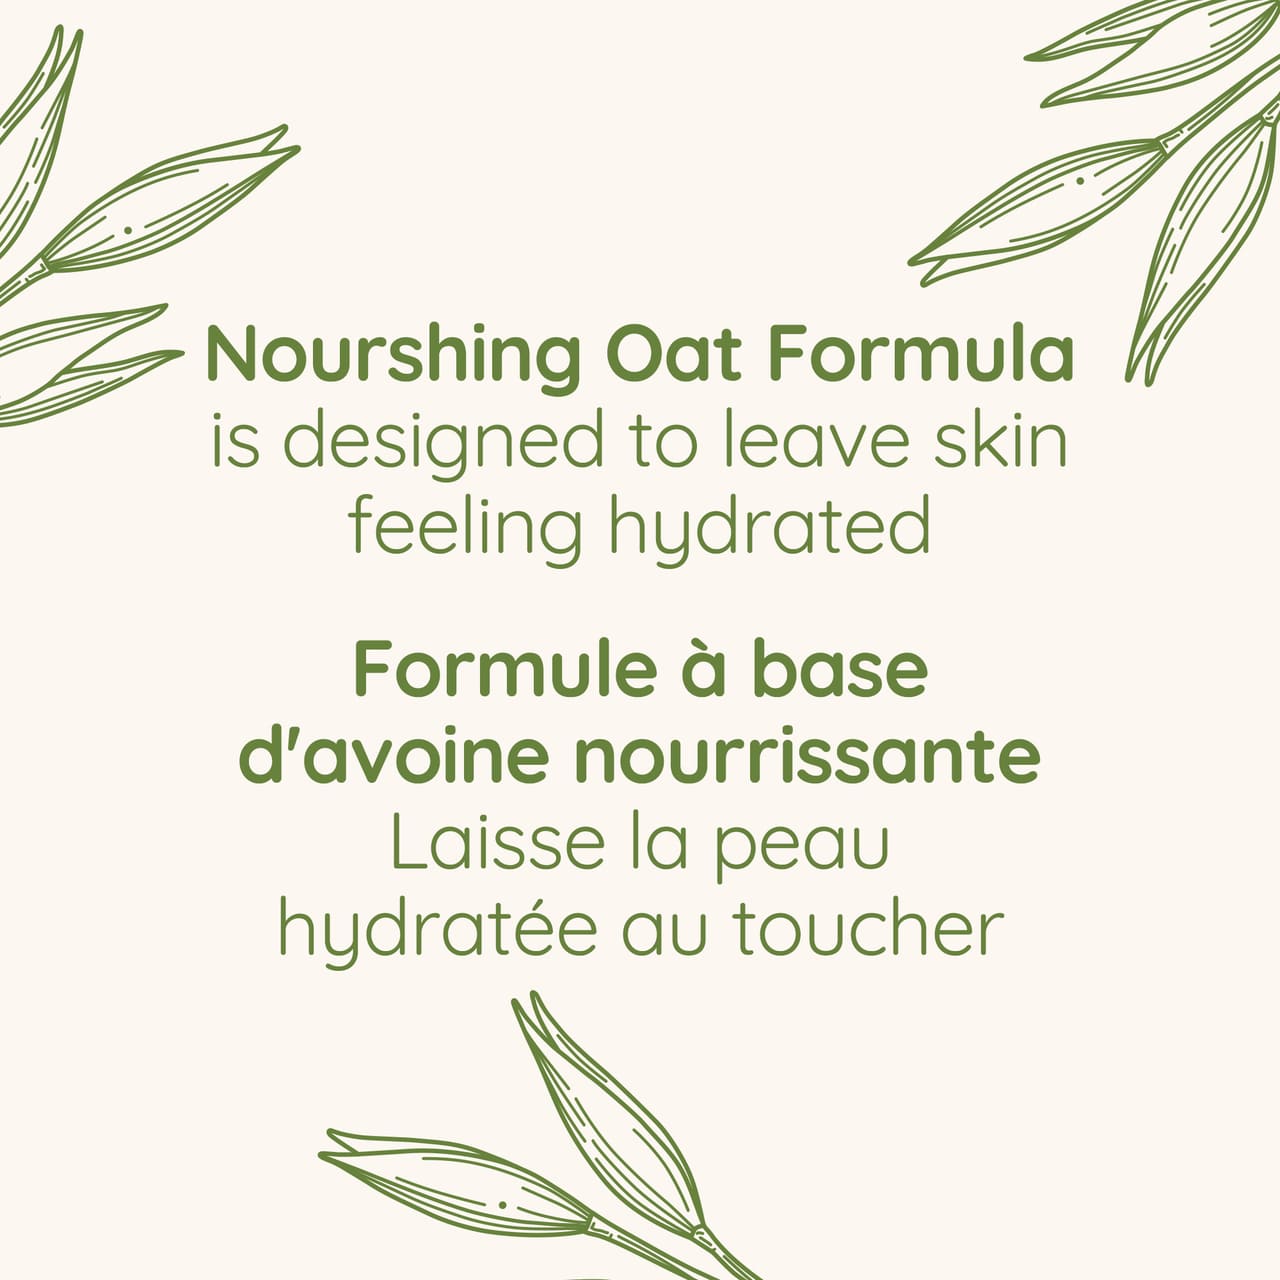 Text explaining that the product's nourishing oat formula is designed to leave the skin feeling hydrated.